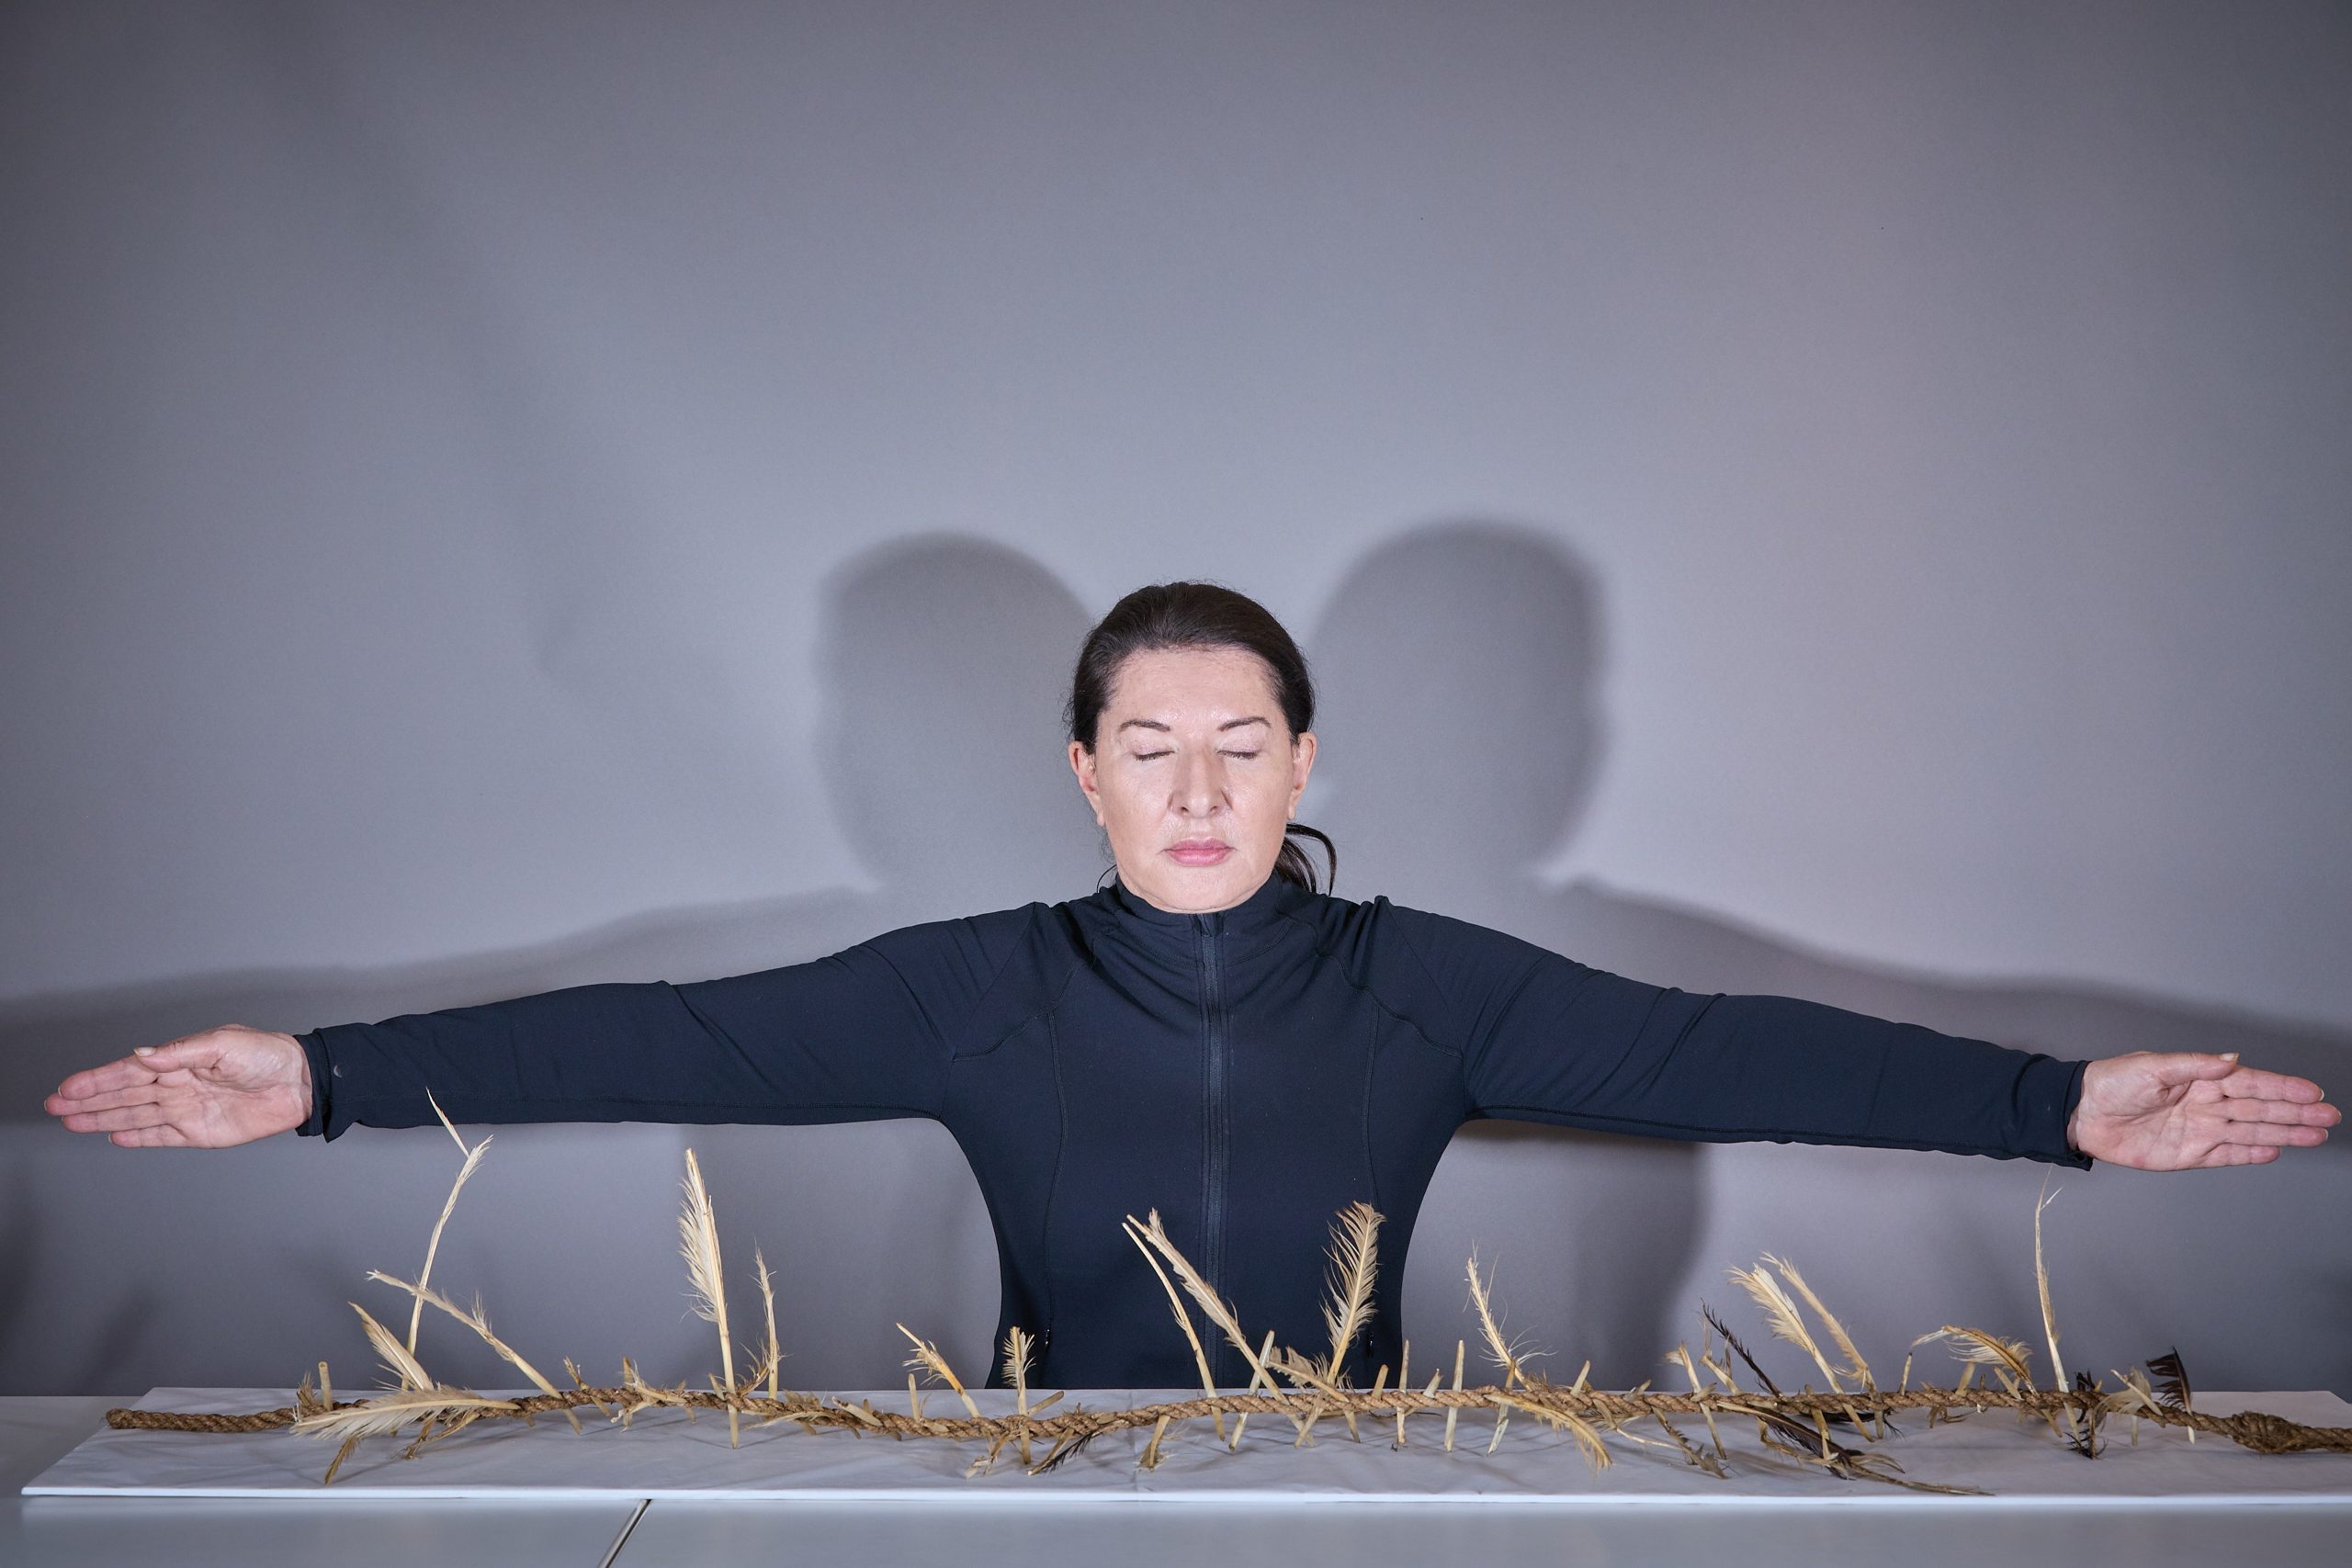 Performance artist Marina Abramović performs on stage with a ‘Witches’ Ladder’ in 2021.